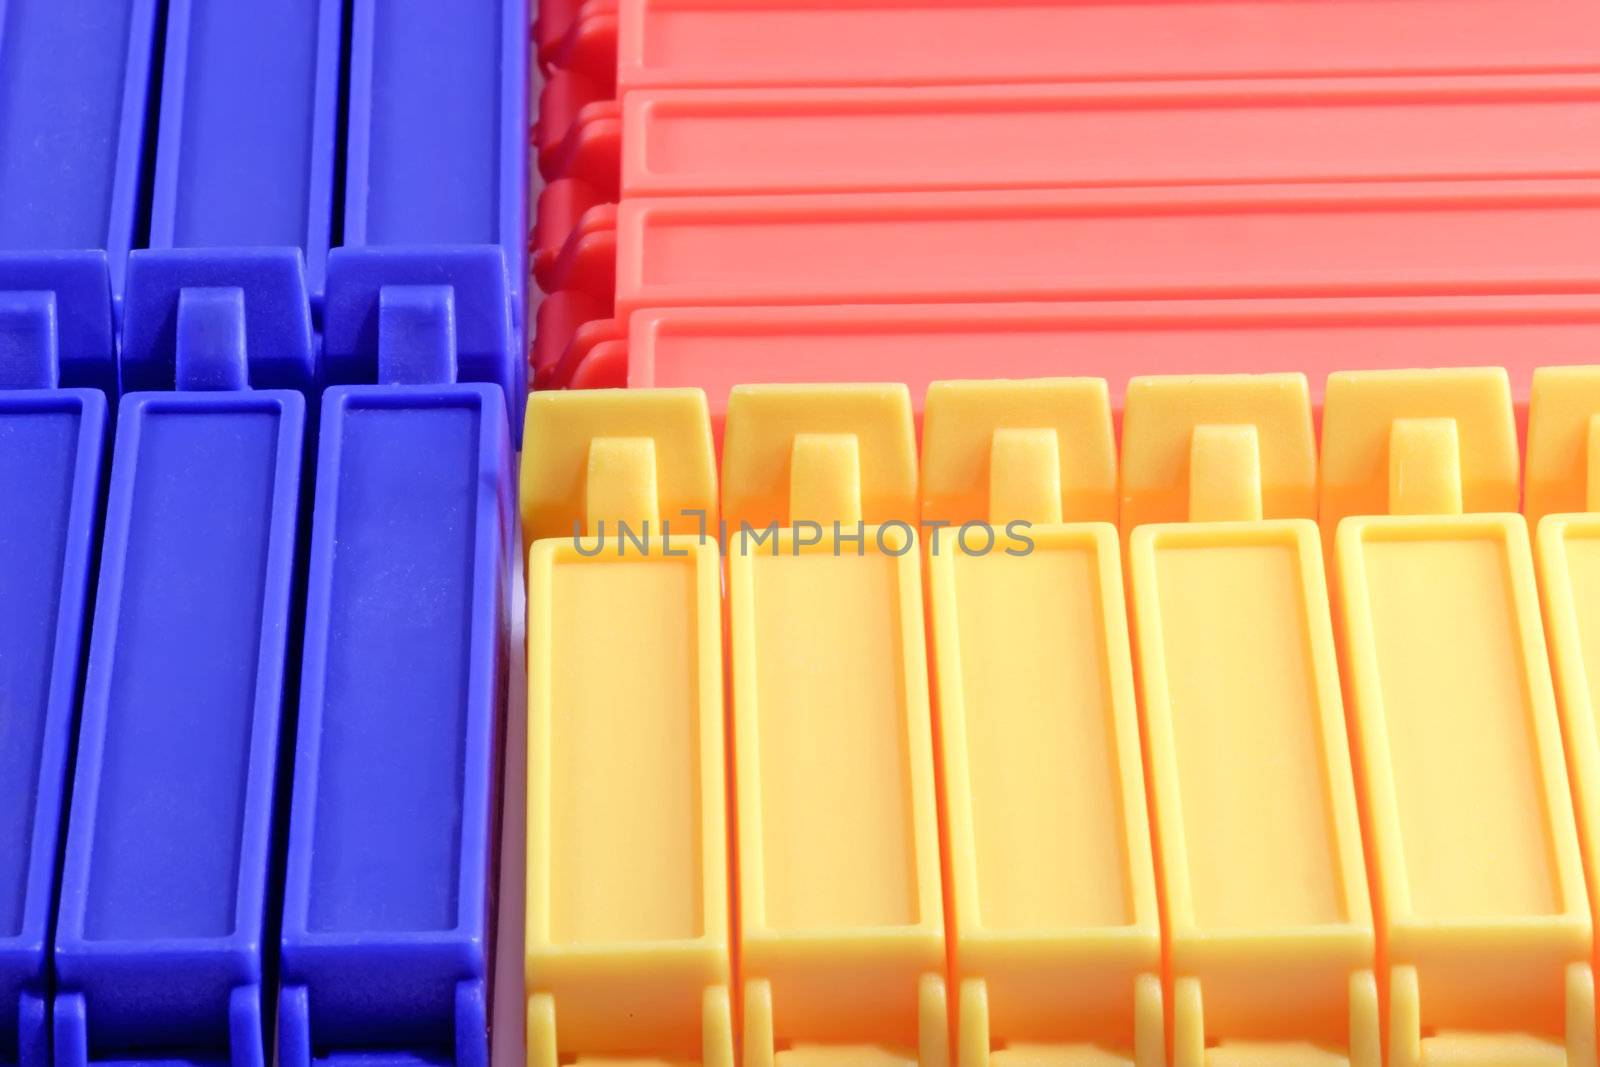 Blue yellow and red kitchen clips in rows